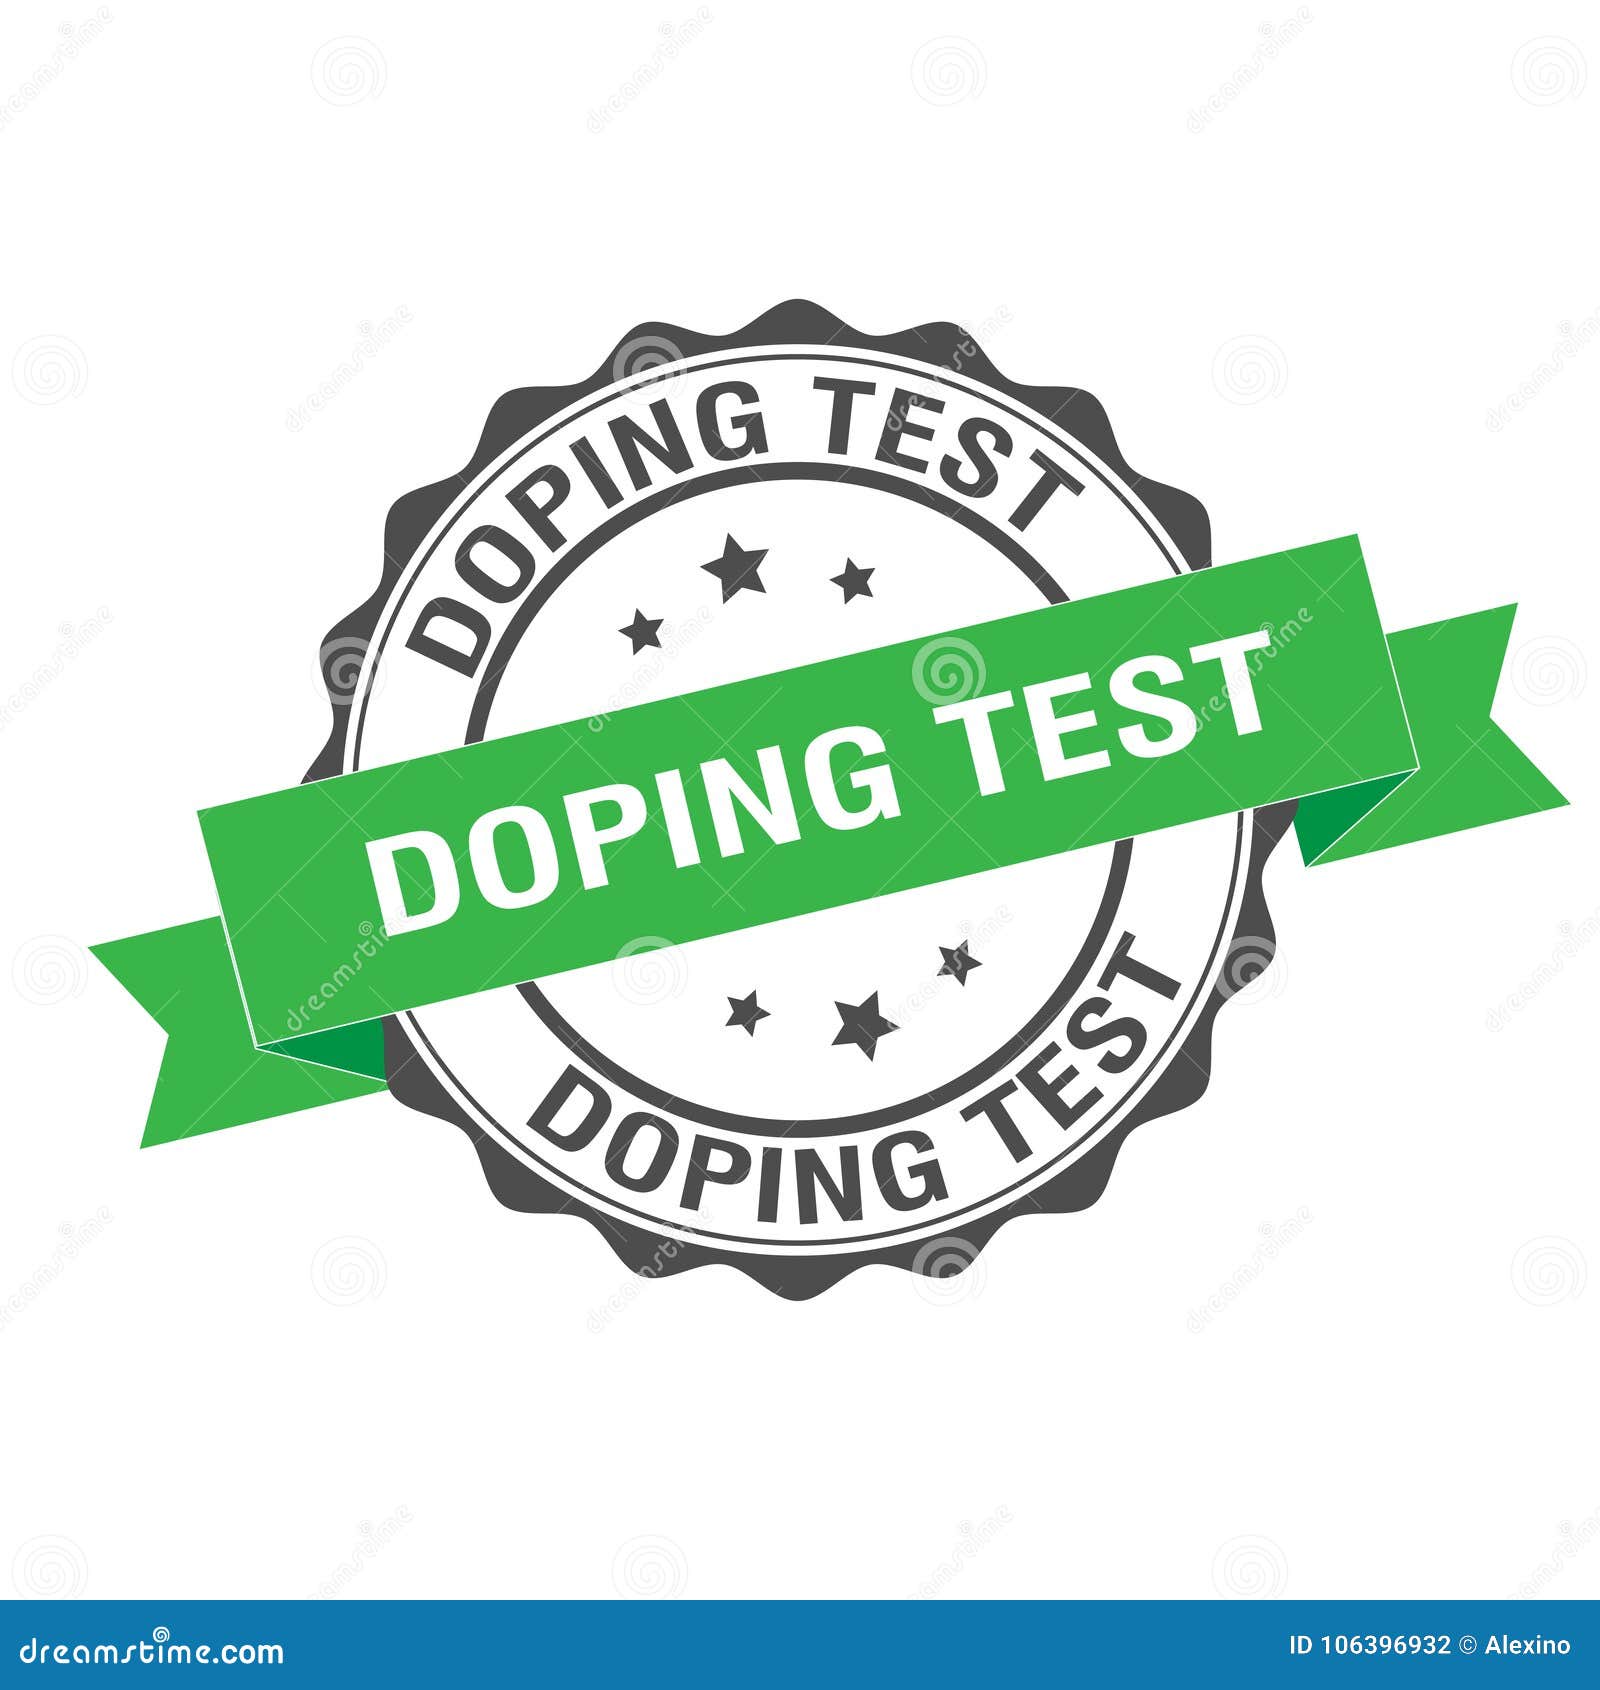 Doping Test Stamp Illustration Stock Vector Illustration Of Product